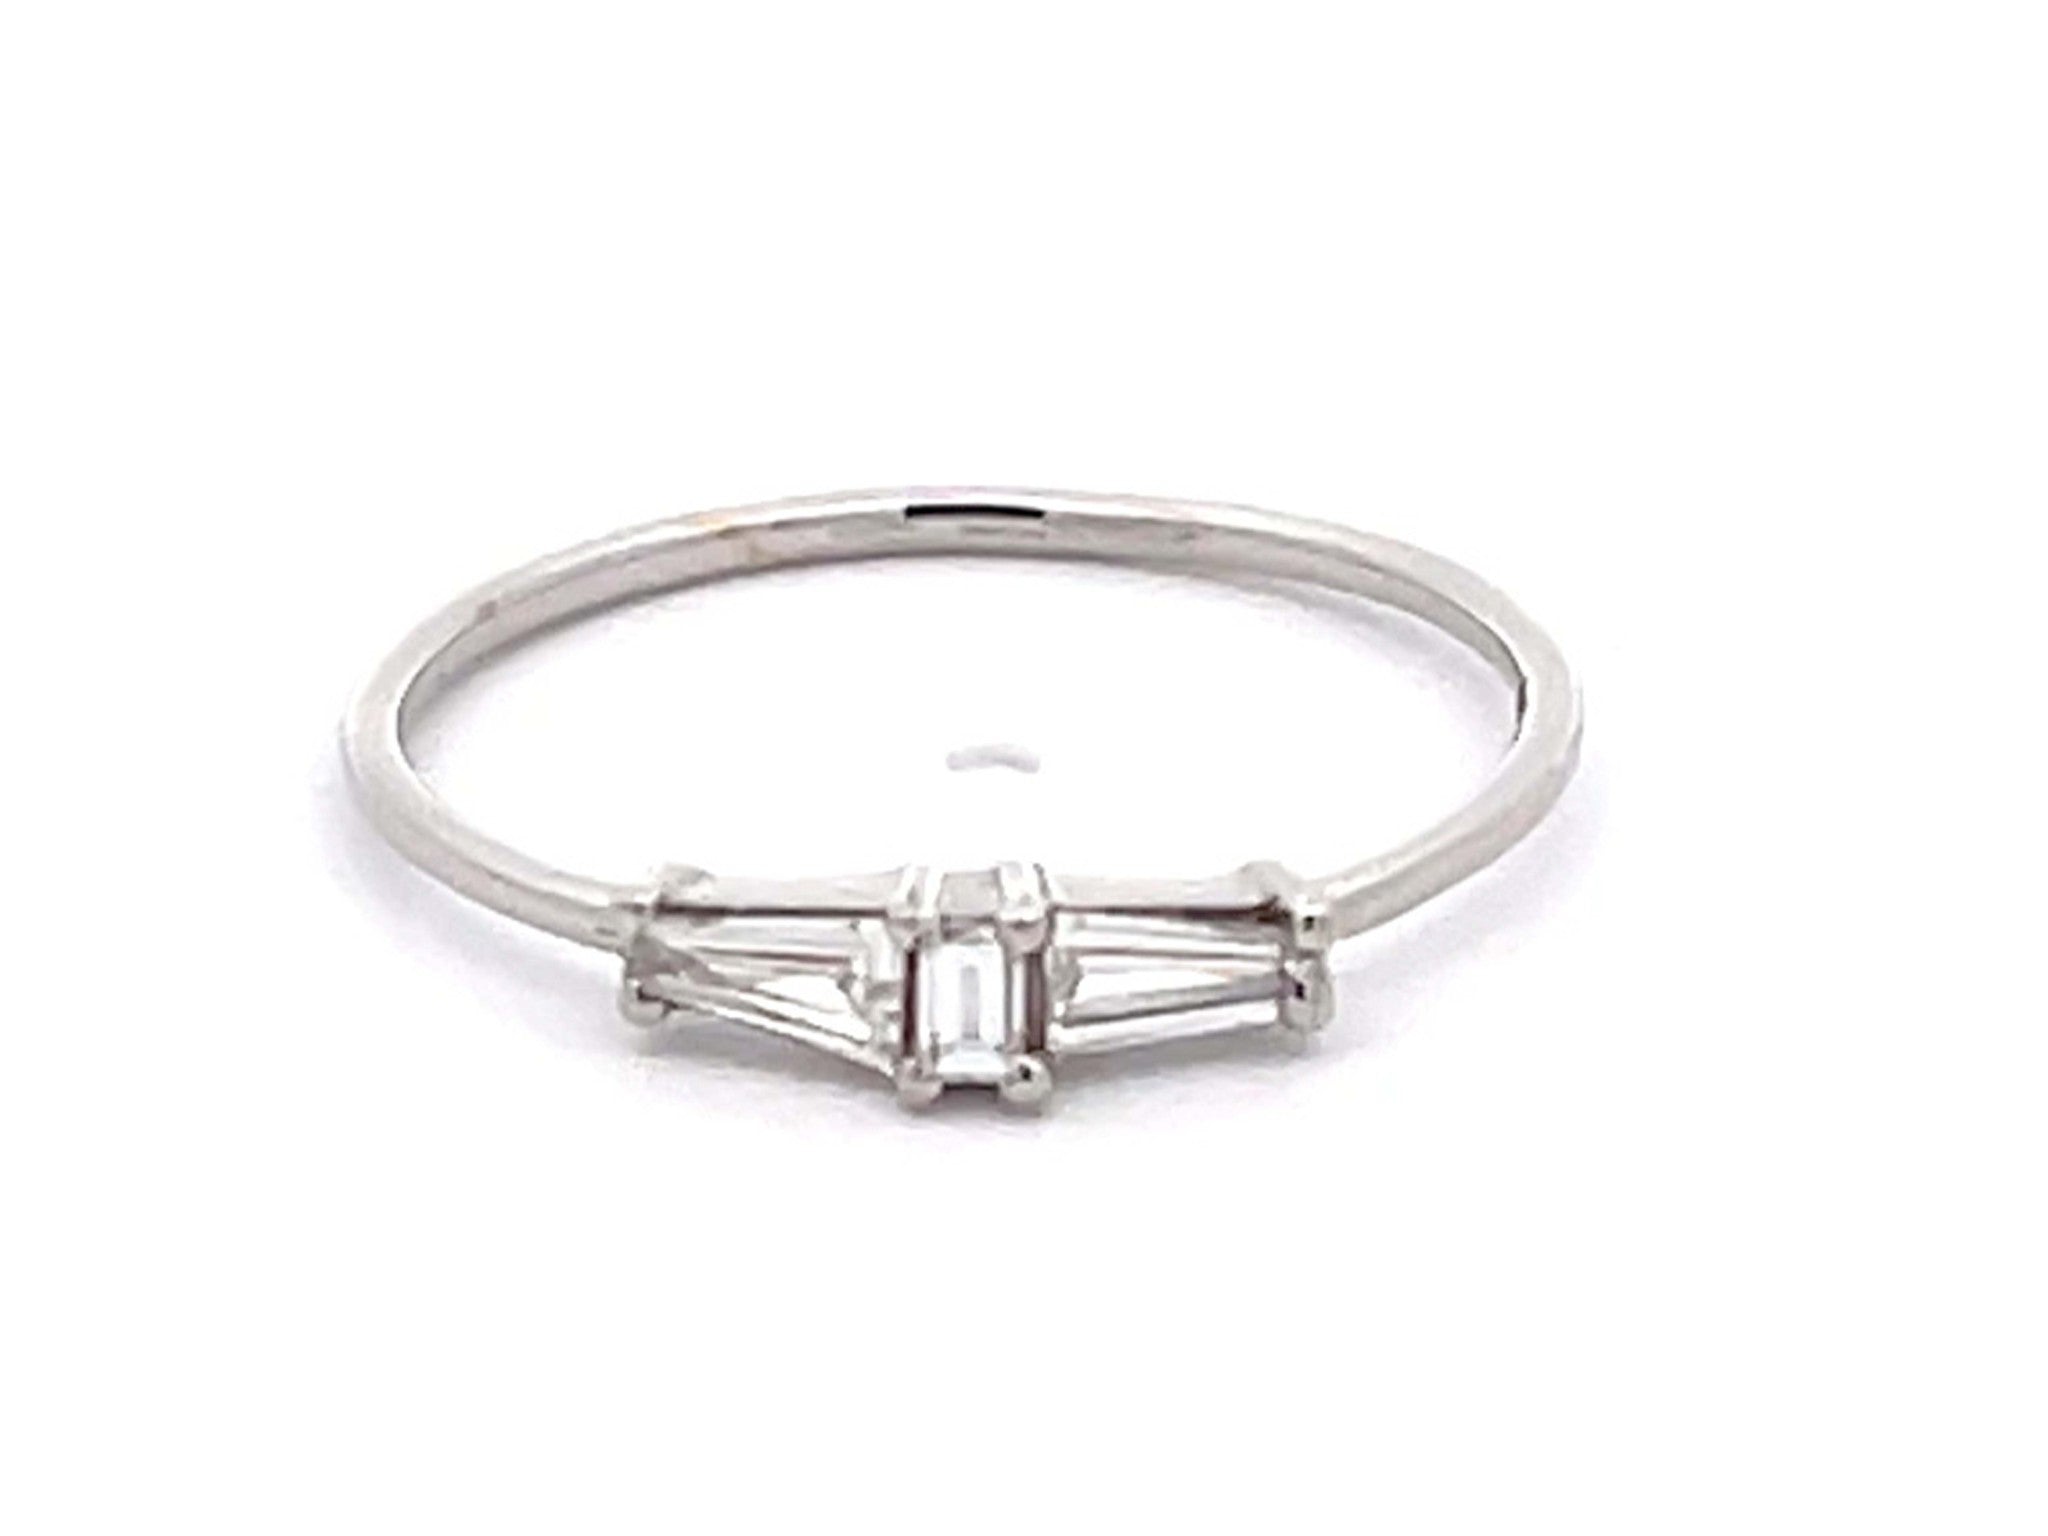 Three Baguette Diamond Thin Band Ring in 14k White Gold